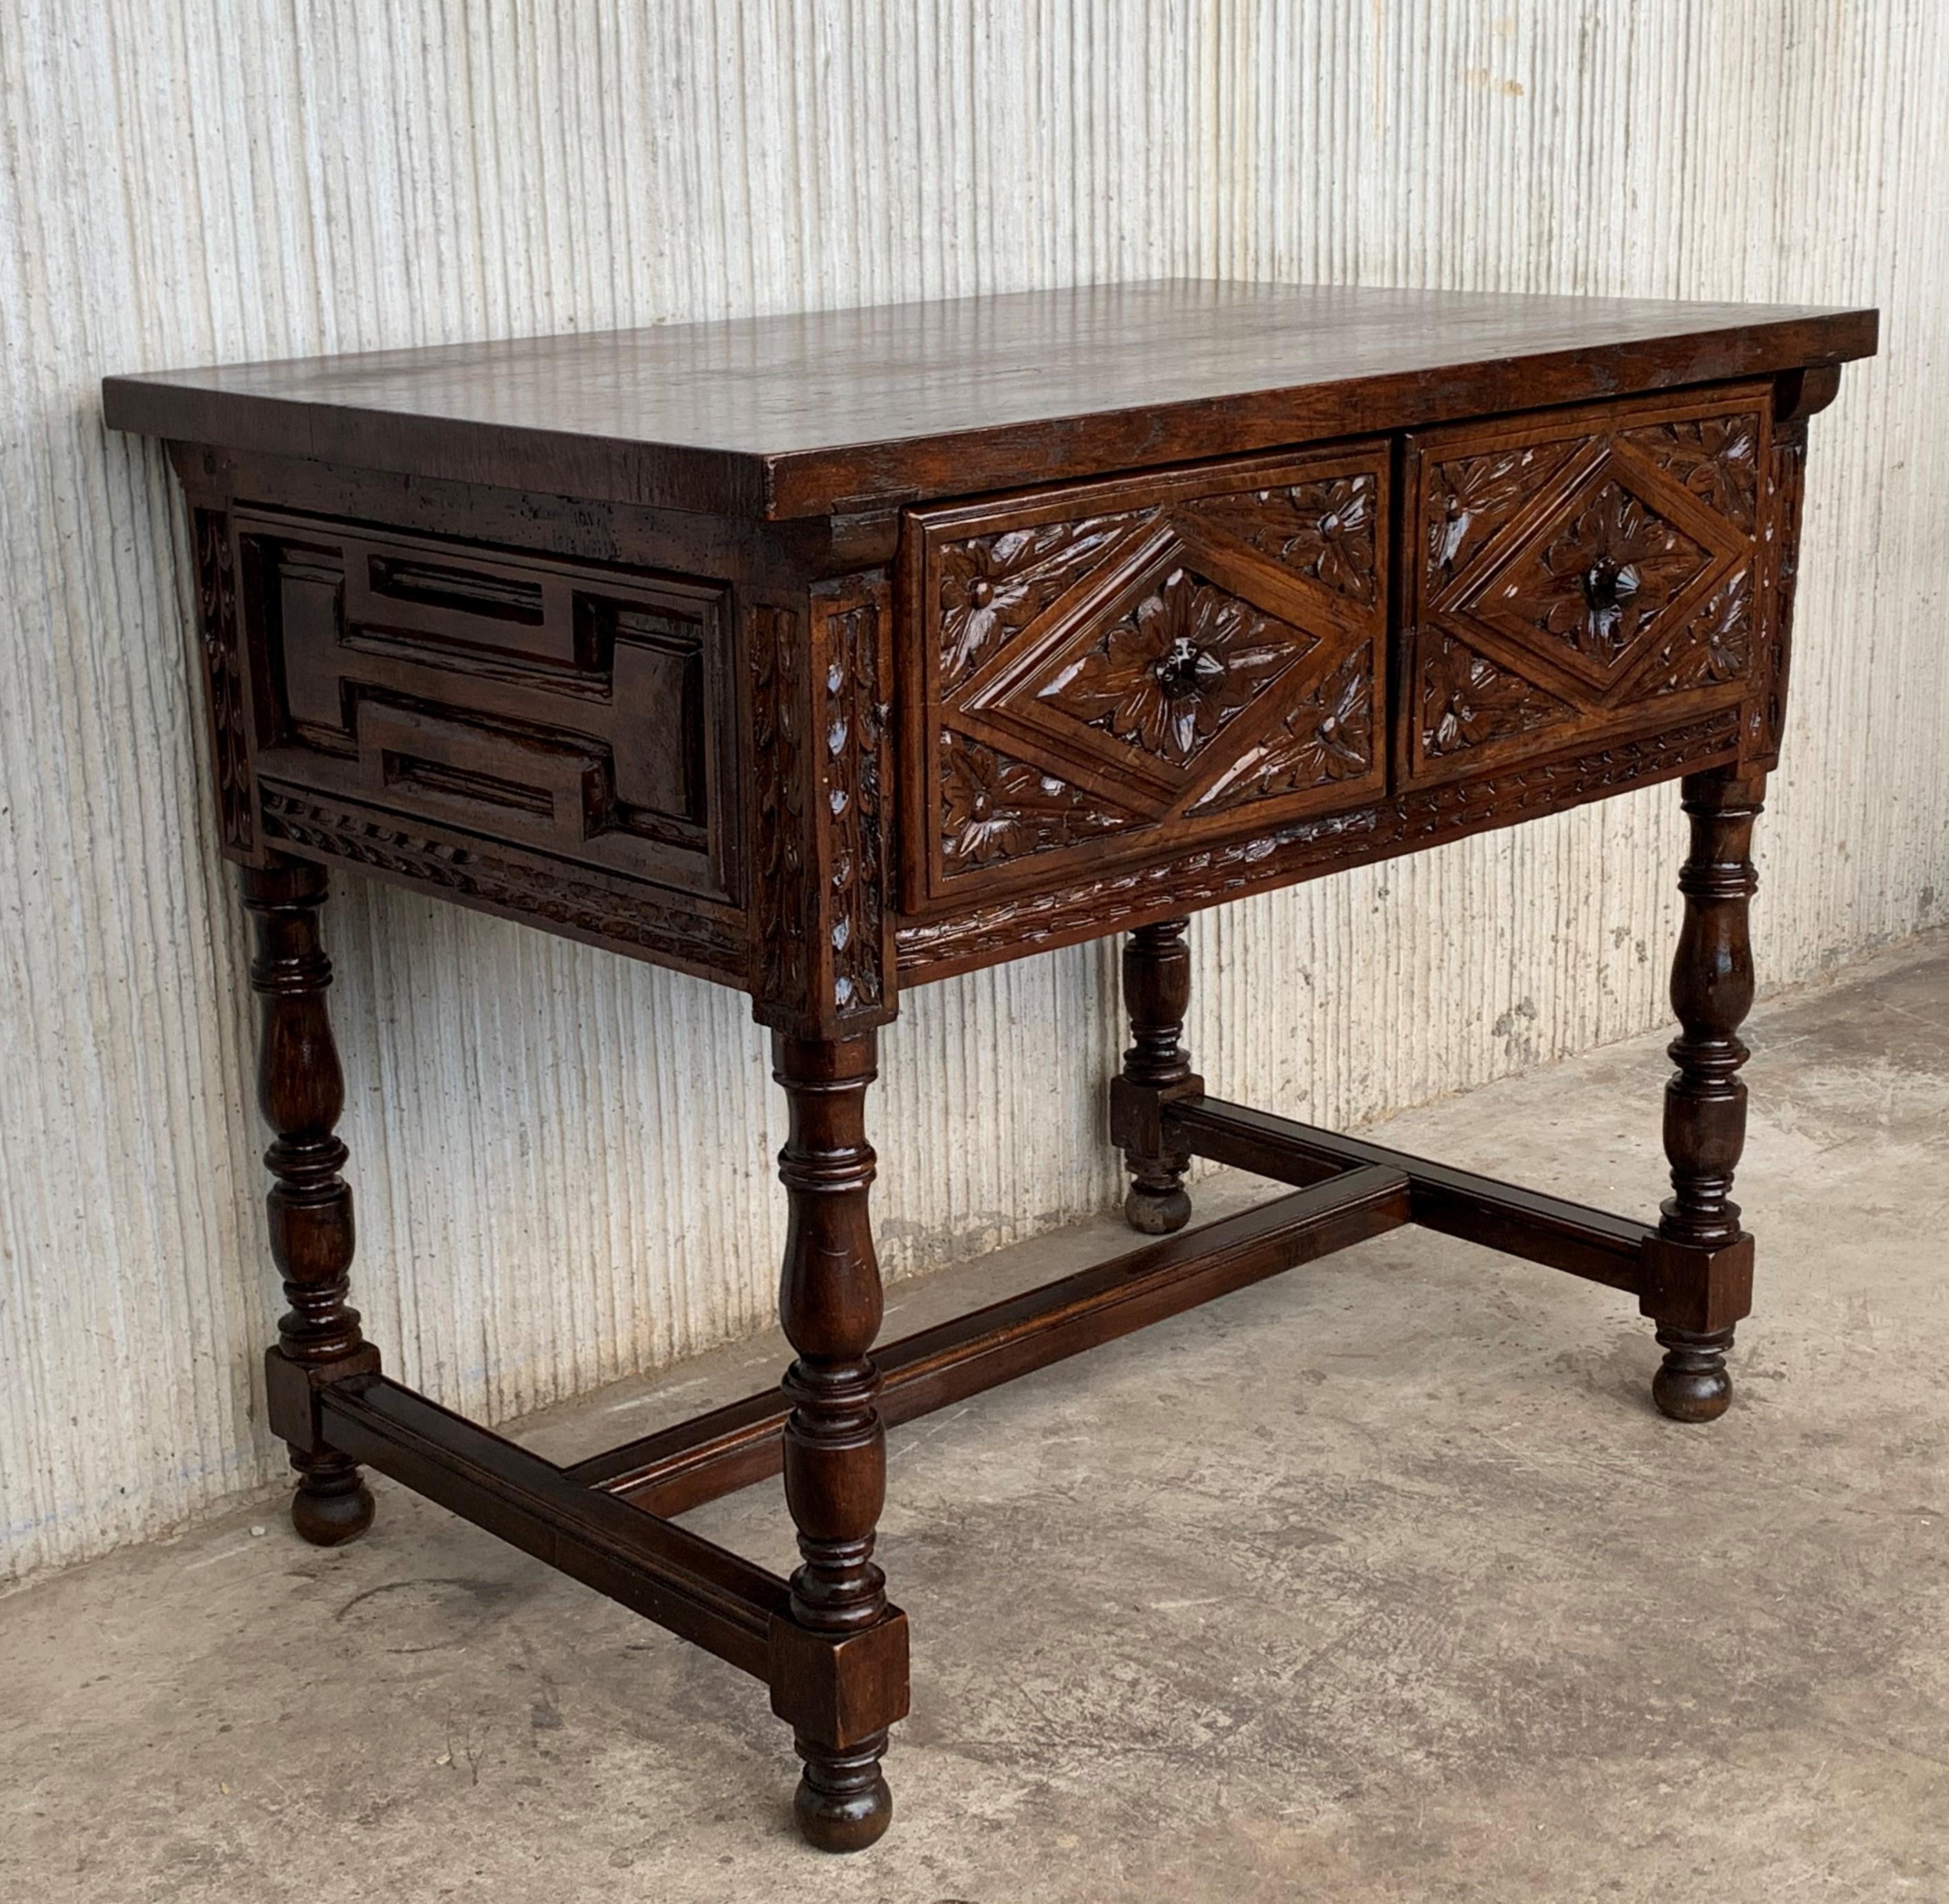 19th Century Spanish Console Chest Table with Two Carved Drawers and Original Hardware